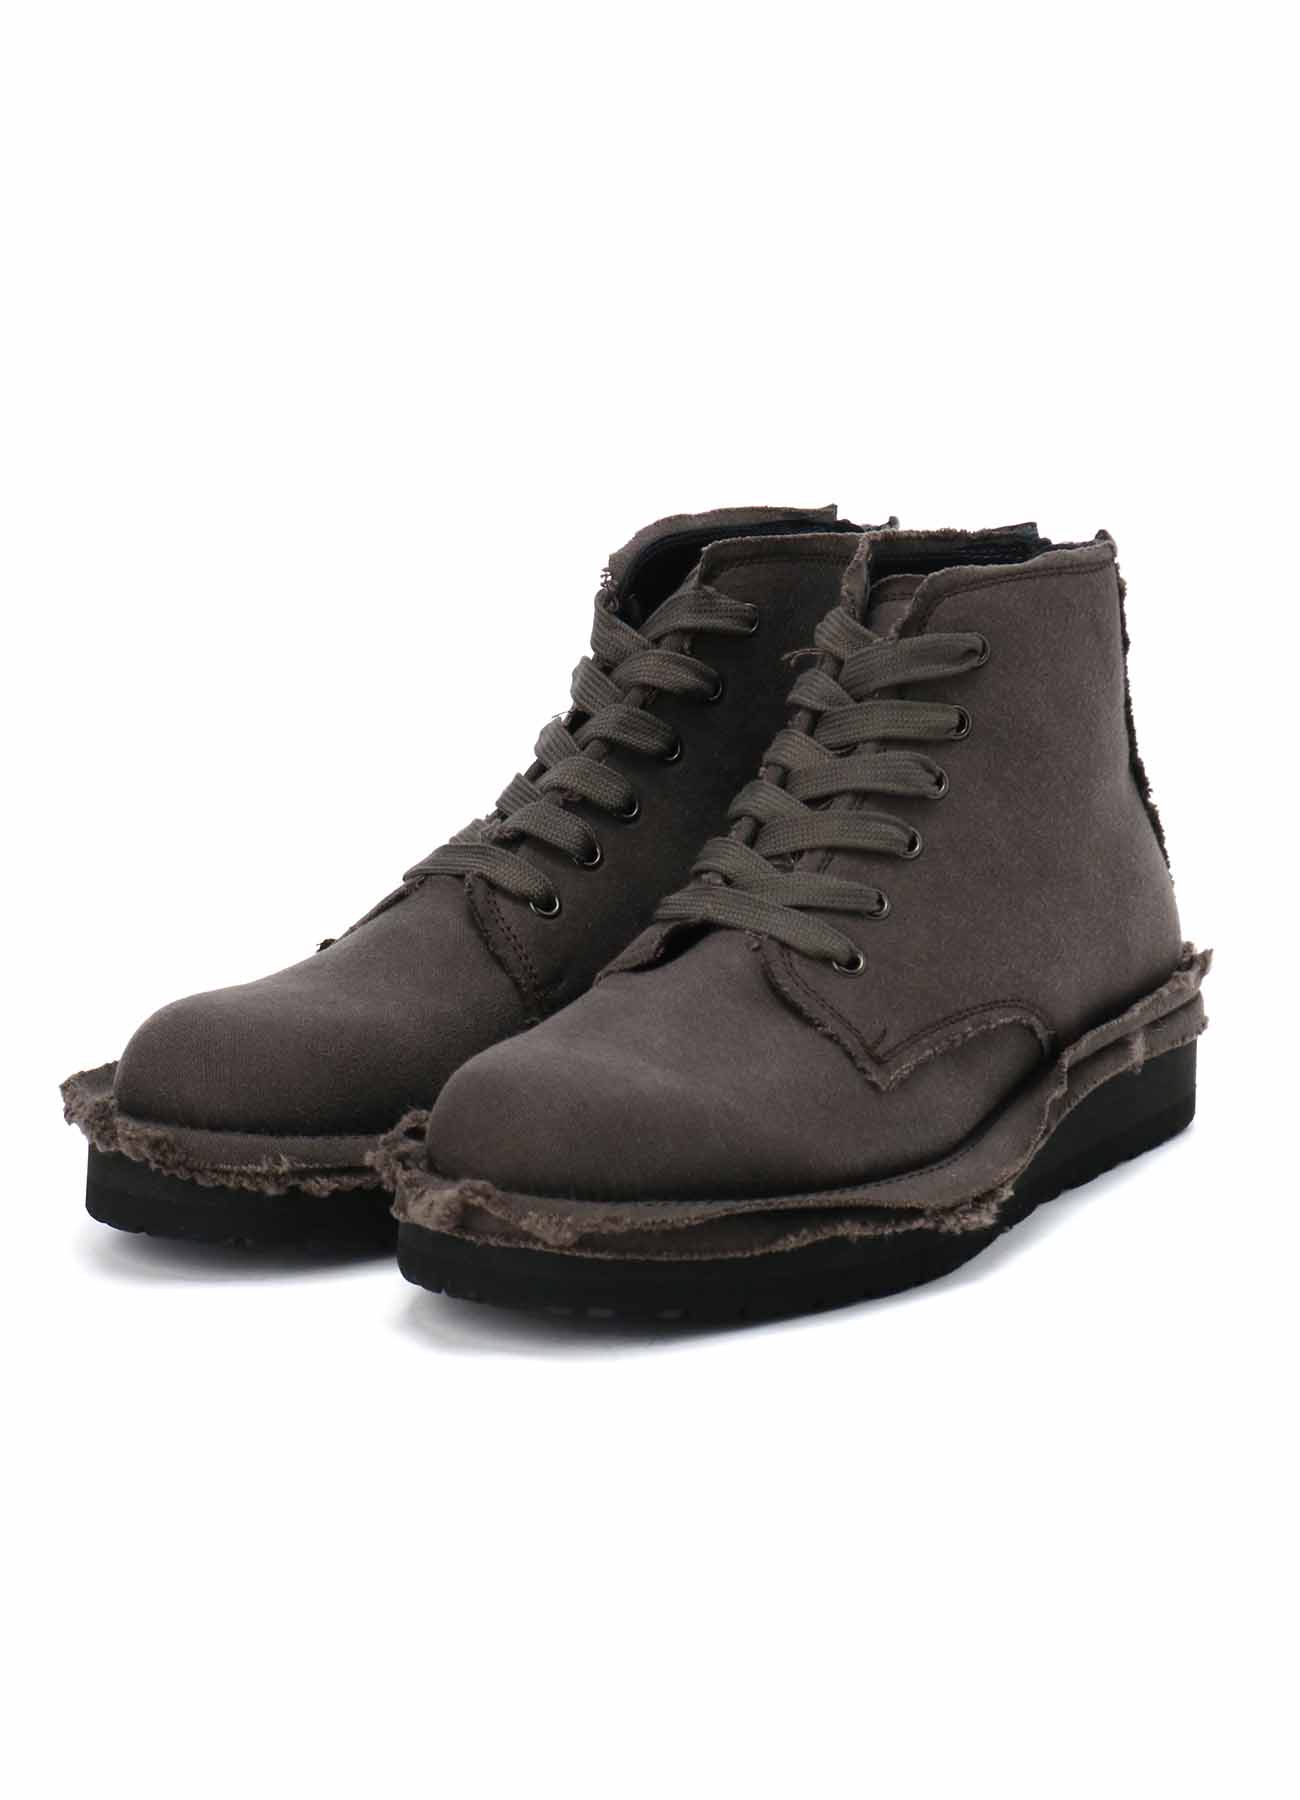 BIS WHIP CODE LACE UP FASTENER BOOTS